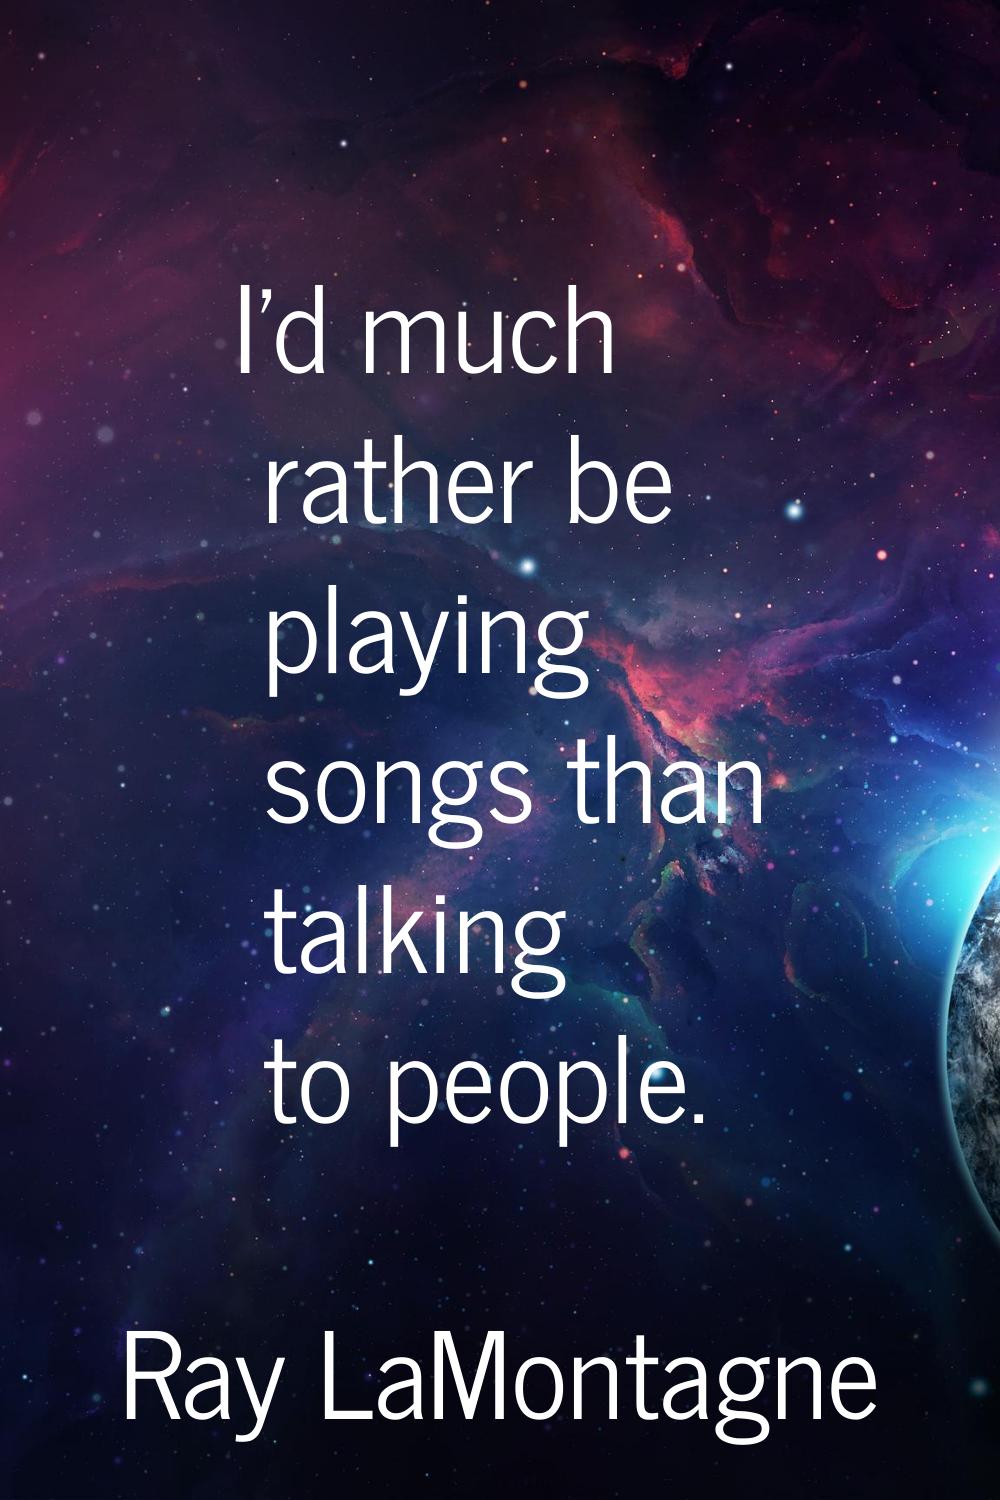 I'd much rather be playing songs than talking to people.